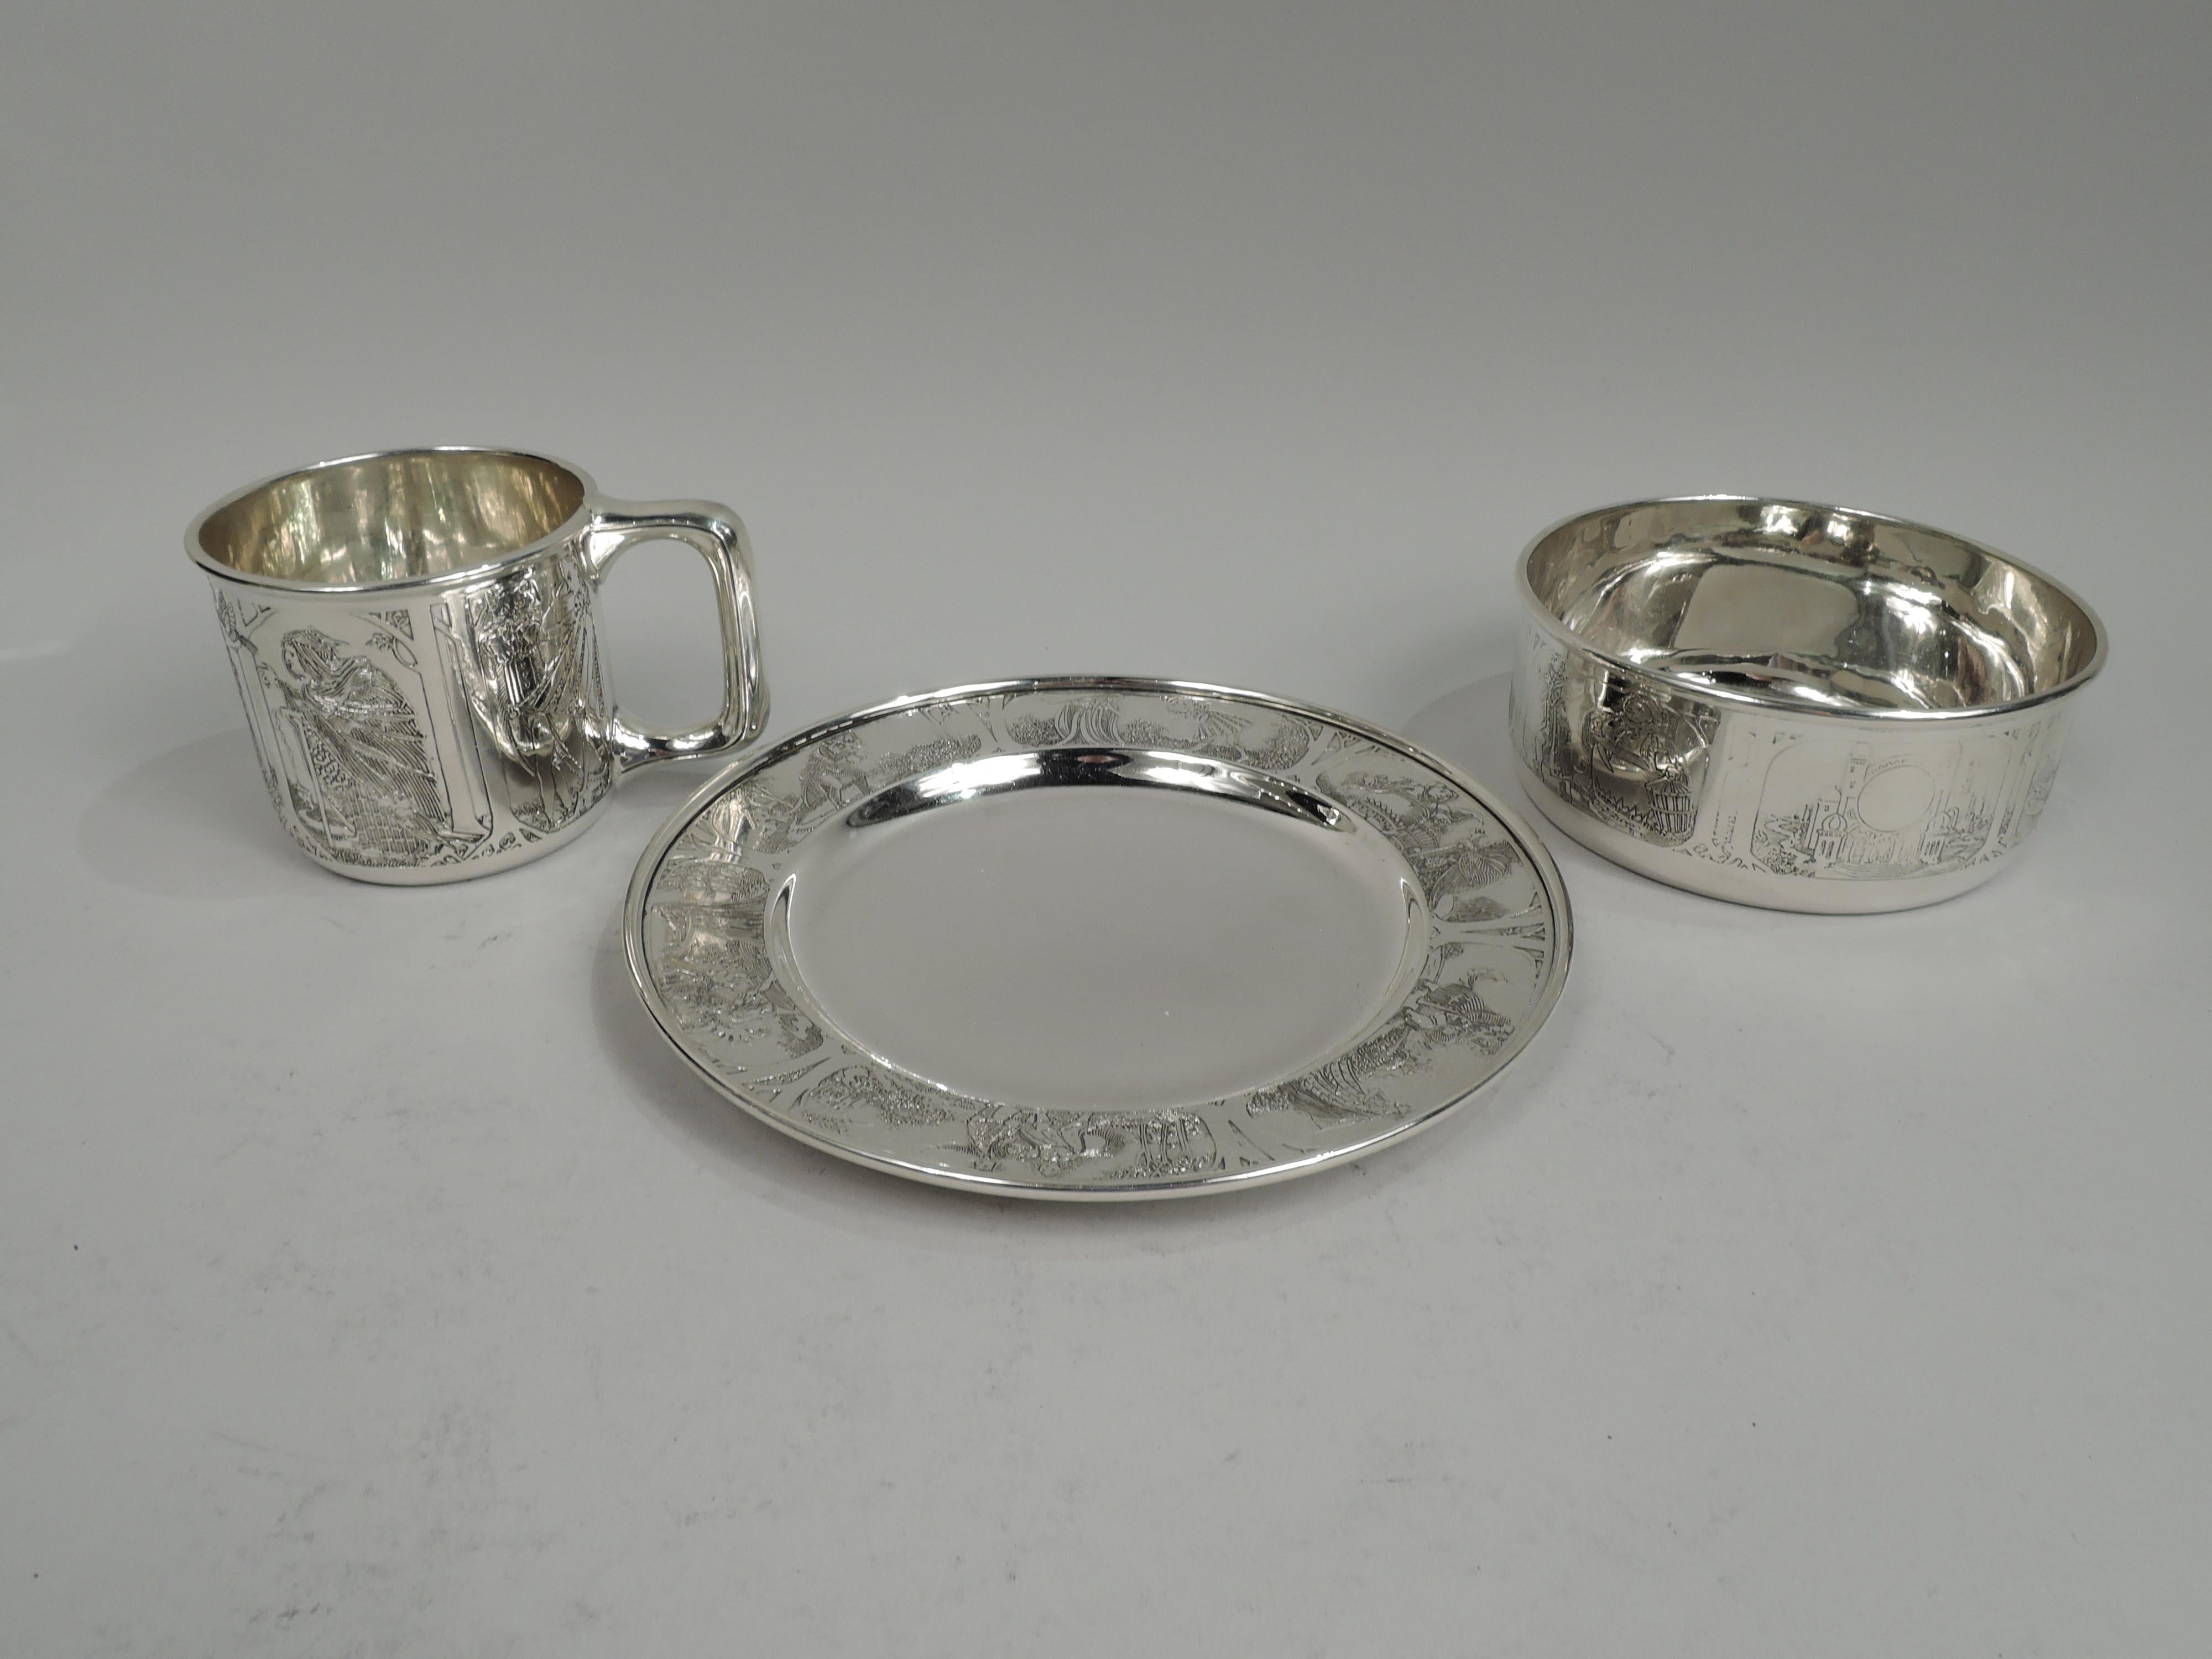 Turn-of-the-century Art Nouveau sterling silver 3-piece baby set. Made by Kerr in Newark. This set comprises cup, bowl, and plate. Acid-etched tree-framed fairytale scenes depicting beguiling maidens, stooped crones, and credulous children. Two